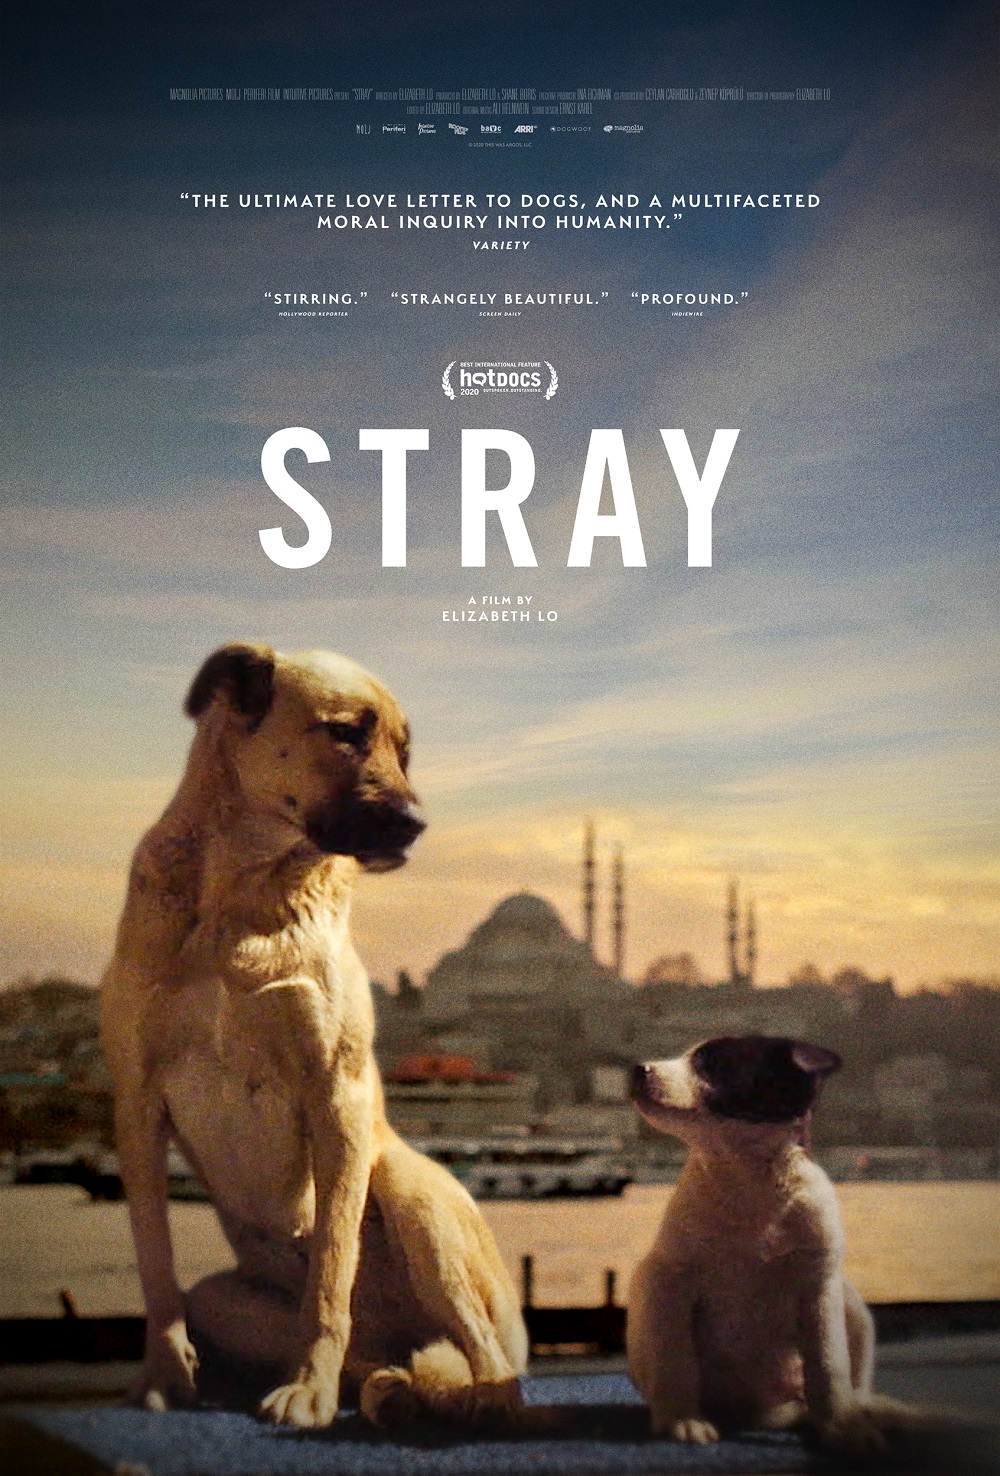 Stray Follow the lives of three dogs in the trailer for new